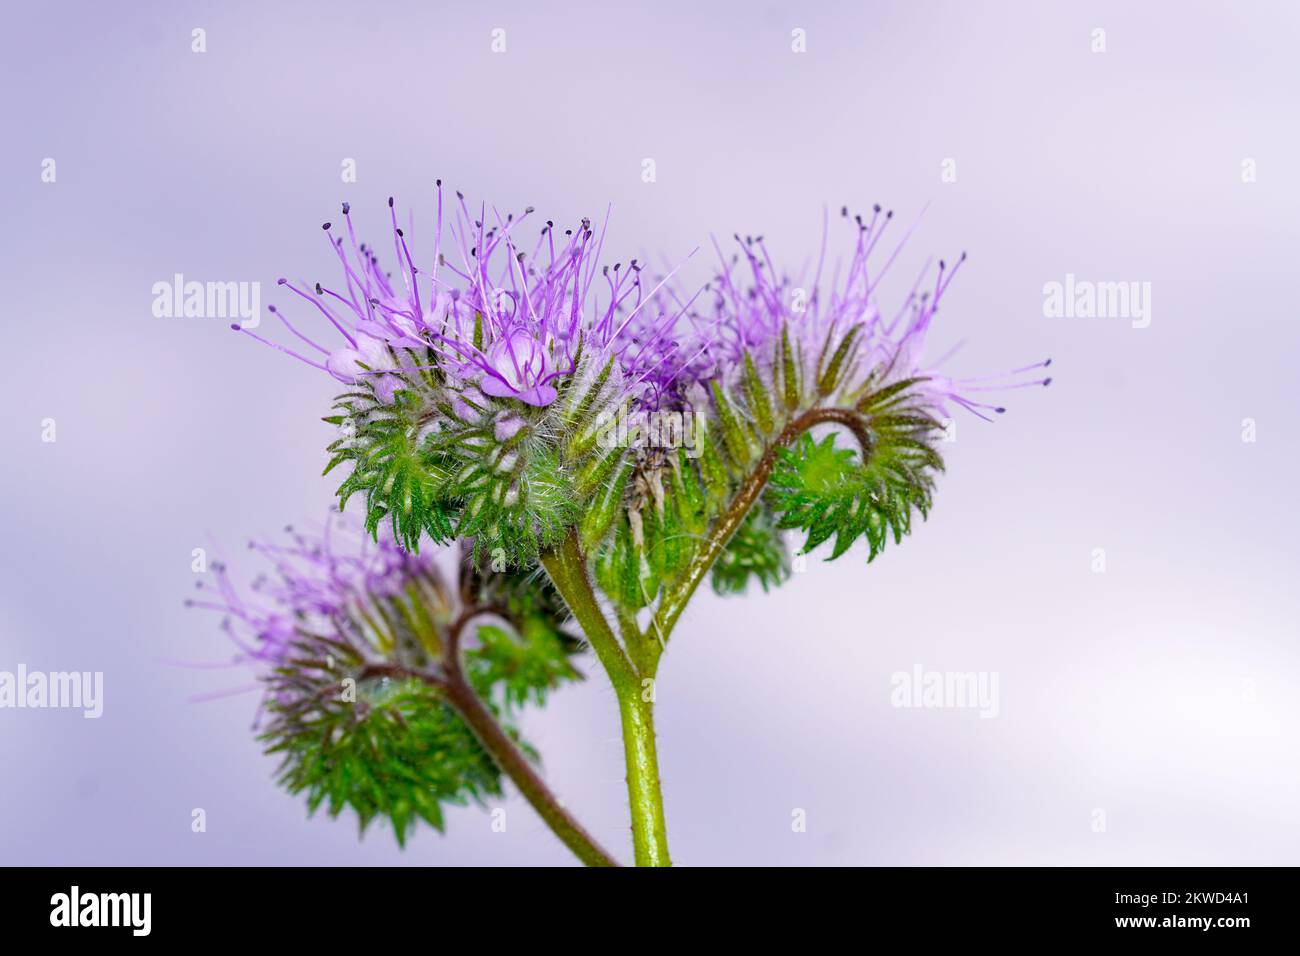 Blooming tufted flower close-up. Bee friendly plant. Phacelia tanacetifolia. Stock Photo